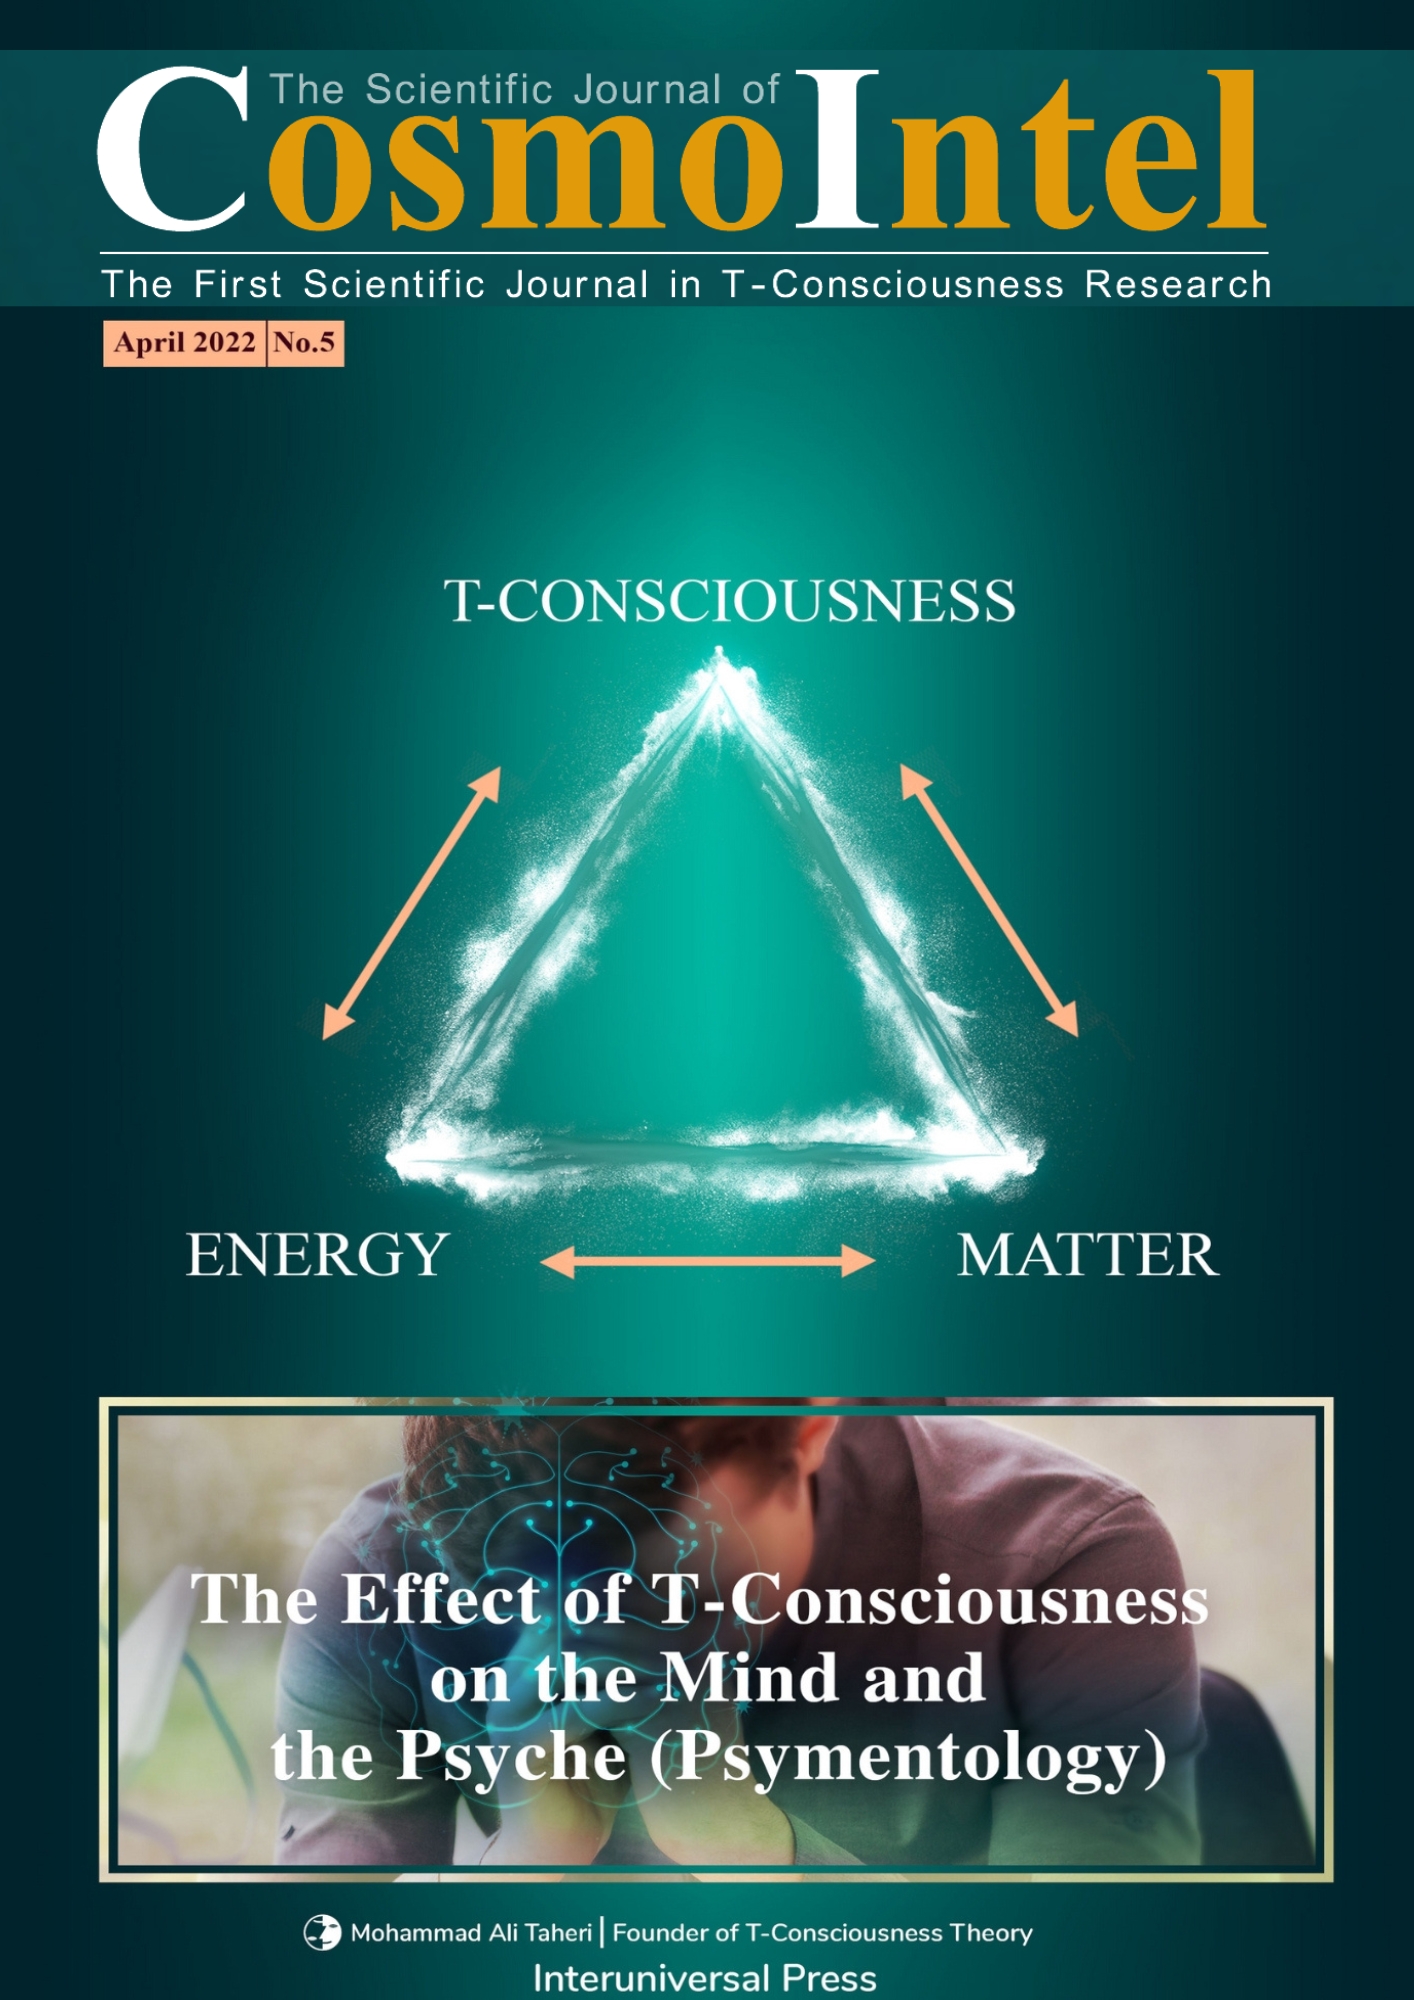 The Effect of T-Consciousness on the Mind and the Psyche (Psymentology)